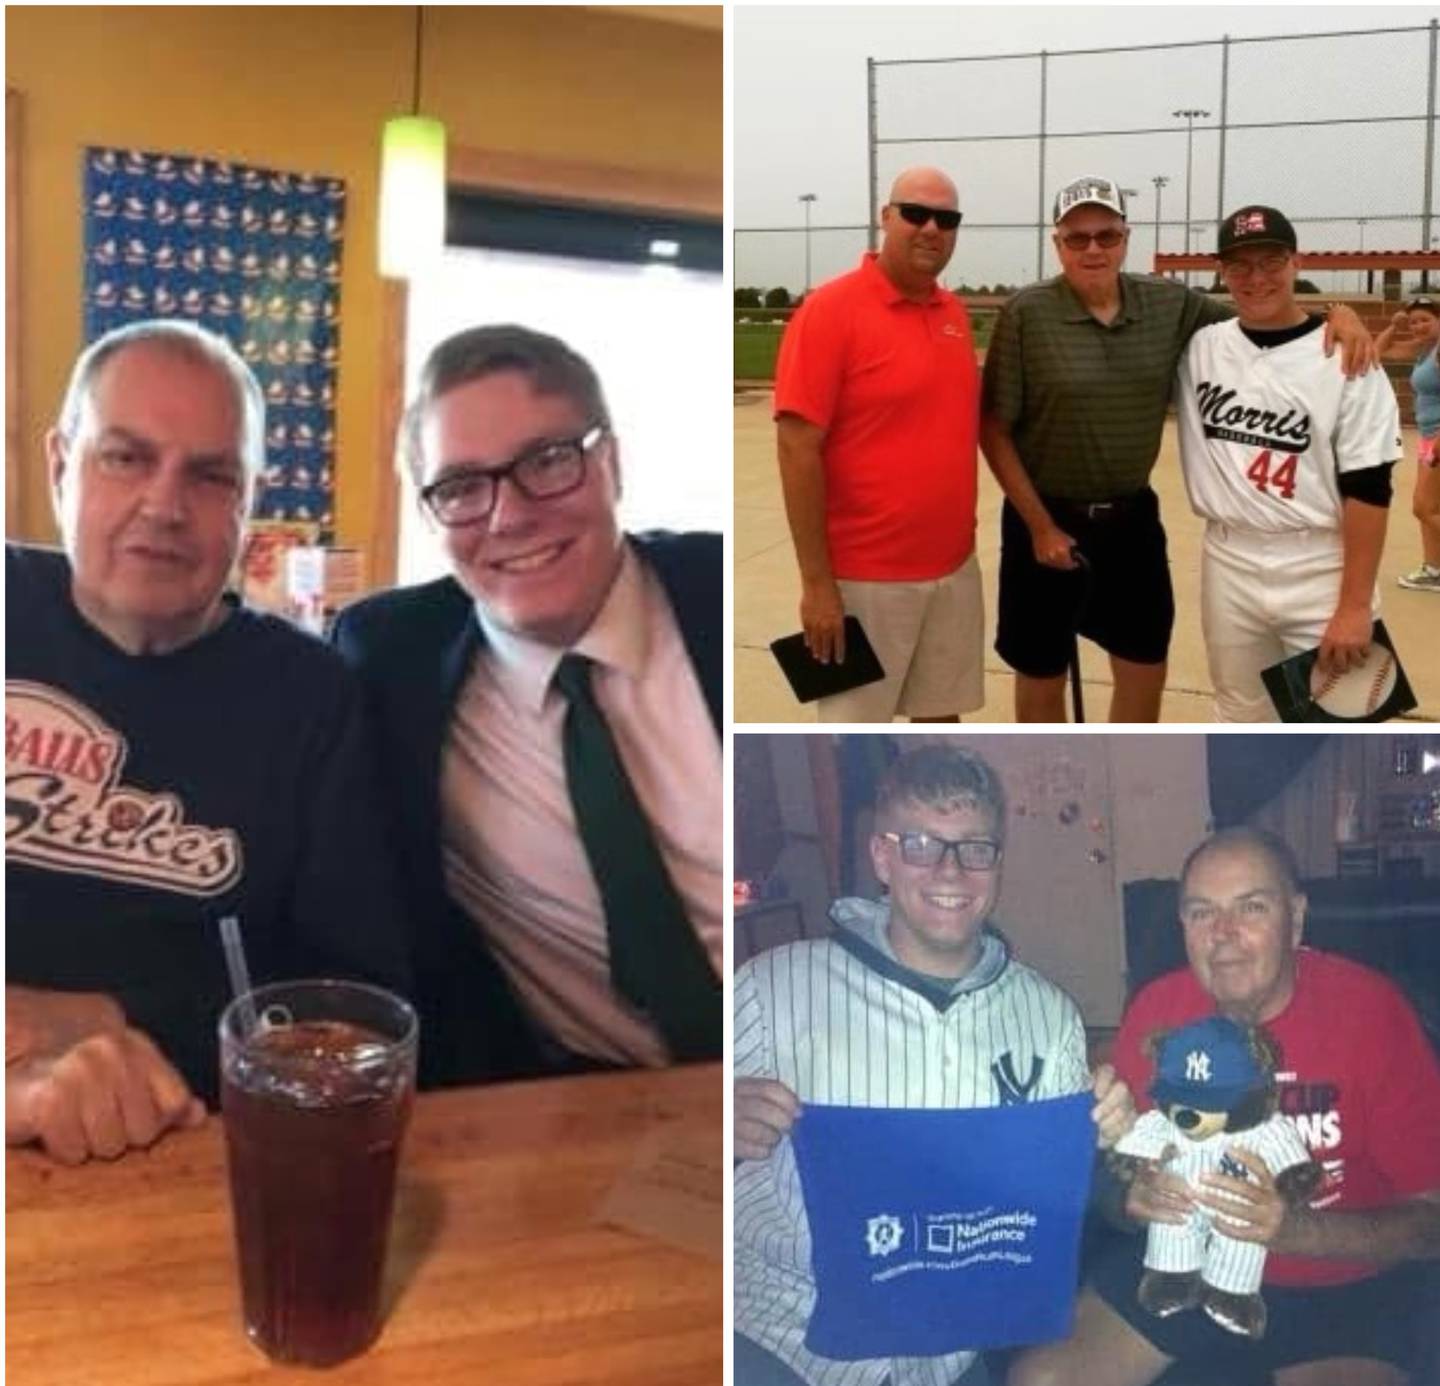 Michael Biegel of Indiana bonded with his grandfather Richard Jaworowksi of Indiana through sports. Biegel is also pictured with Aaron Jaworowski of Missouri, Richard’s nephew, (Aaron is on the left in the top right photo) and a baseball-loving Teddy bear.